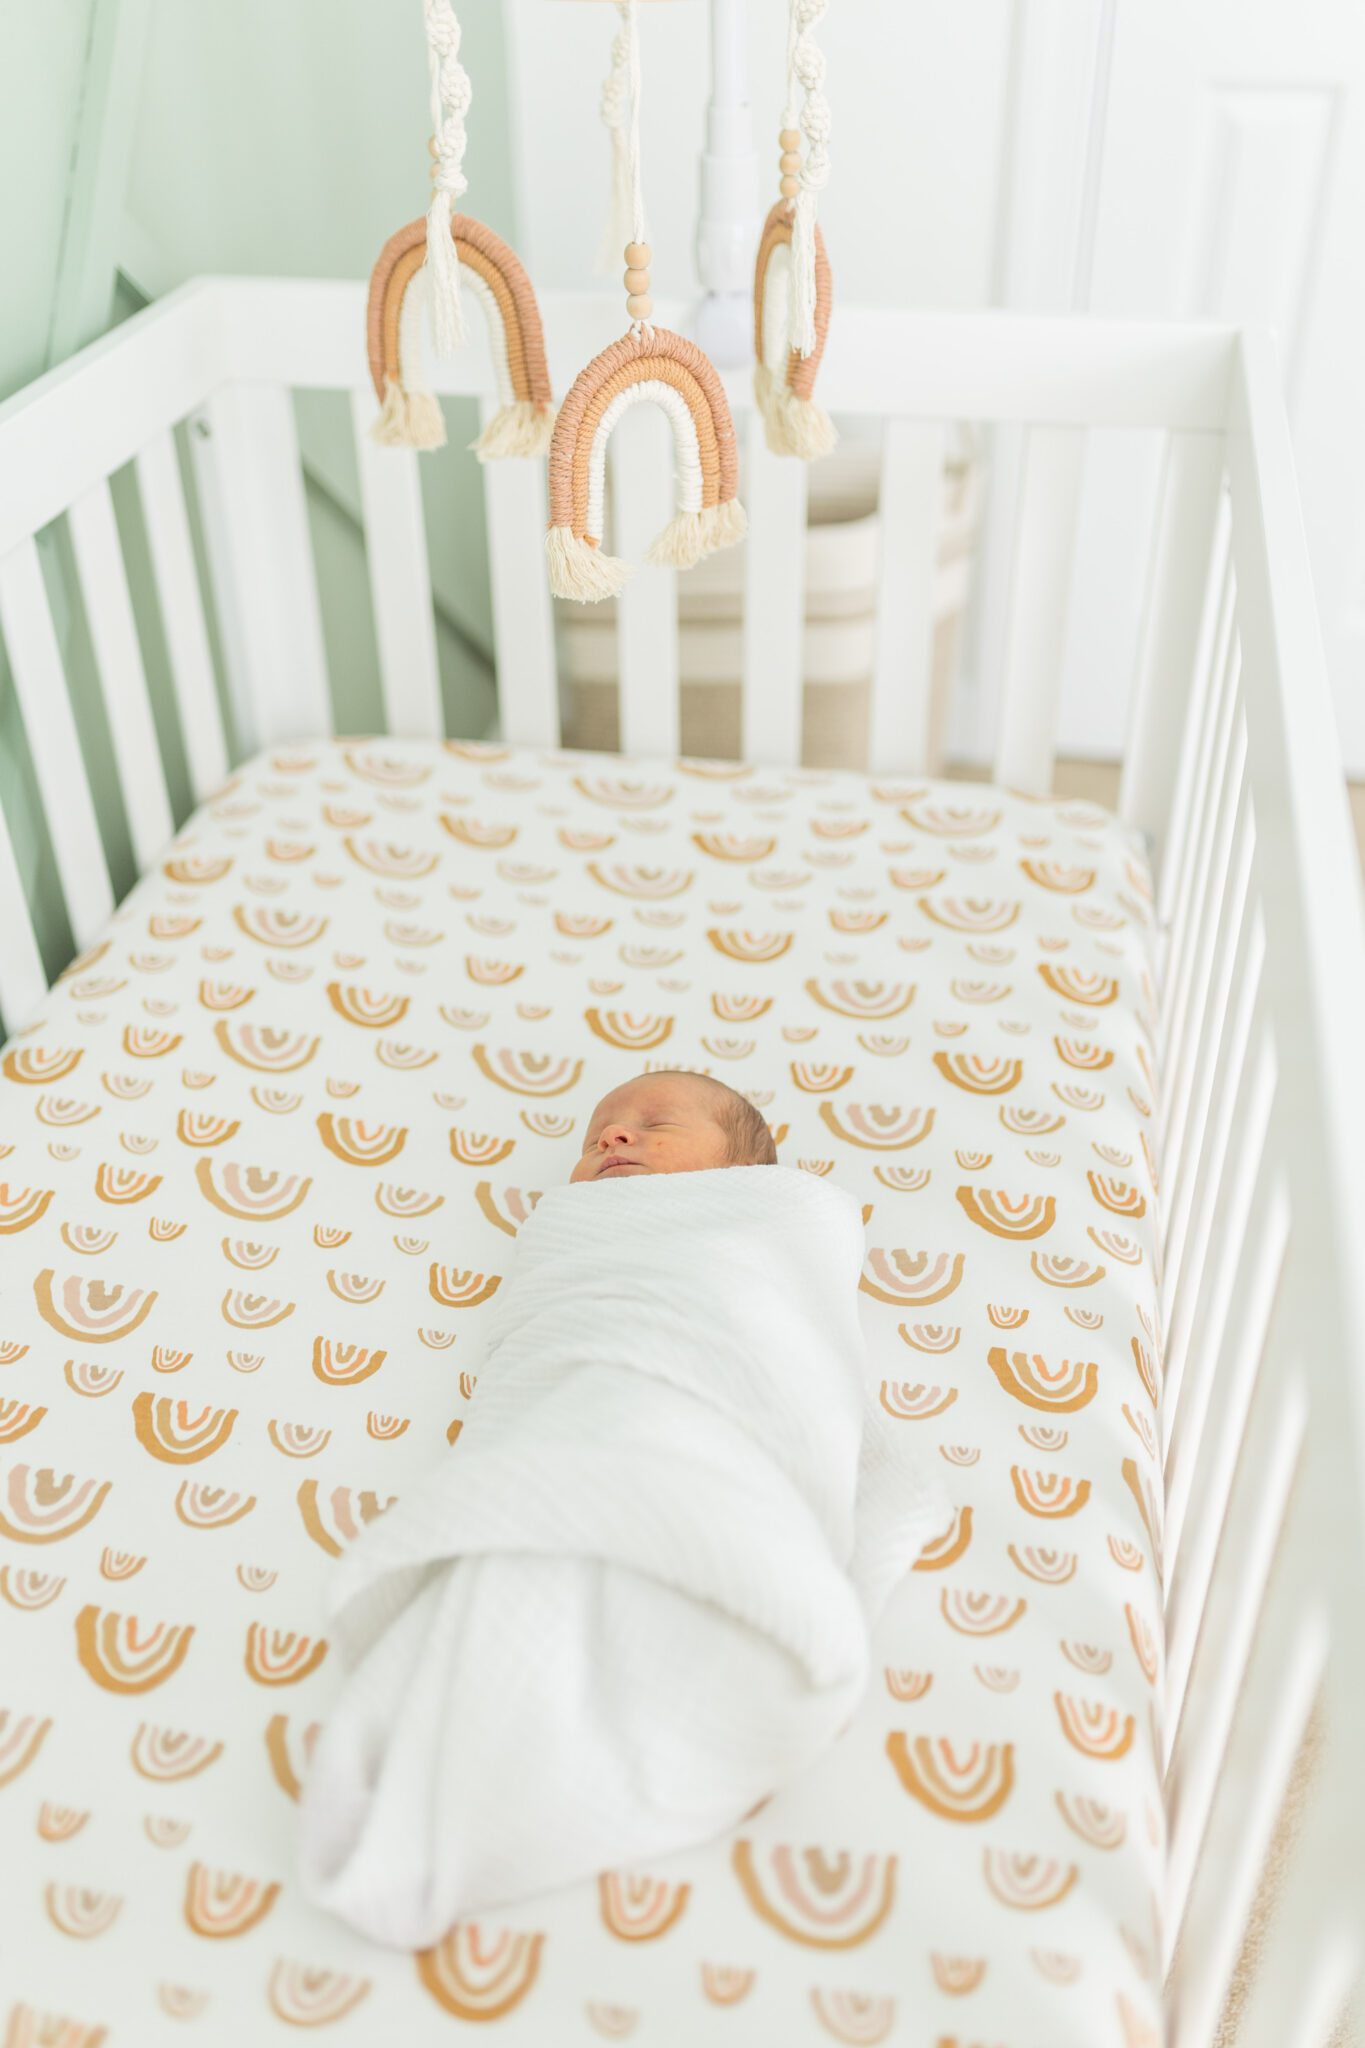 hawaii newborn photography by alison bell photographer. just baby in the crib swaddles with mobile hanging over